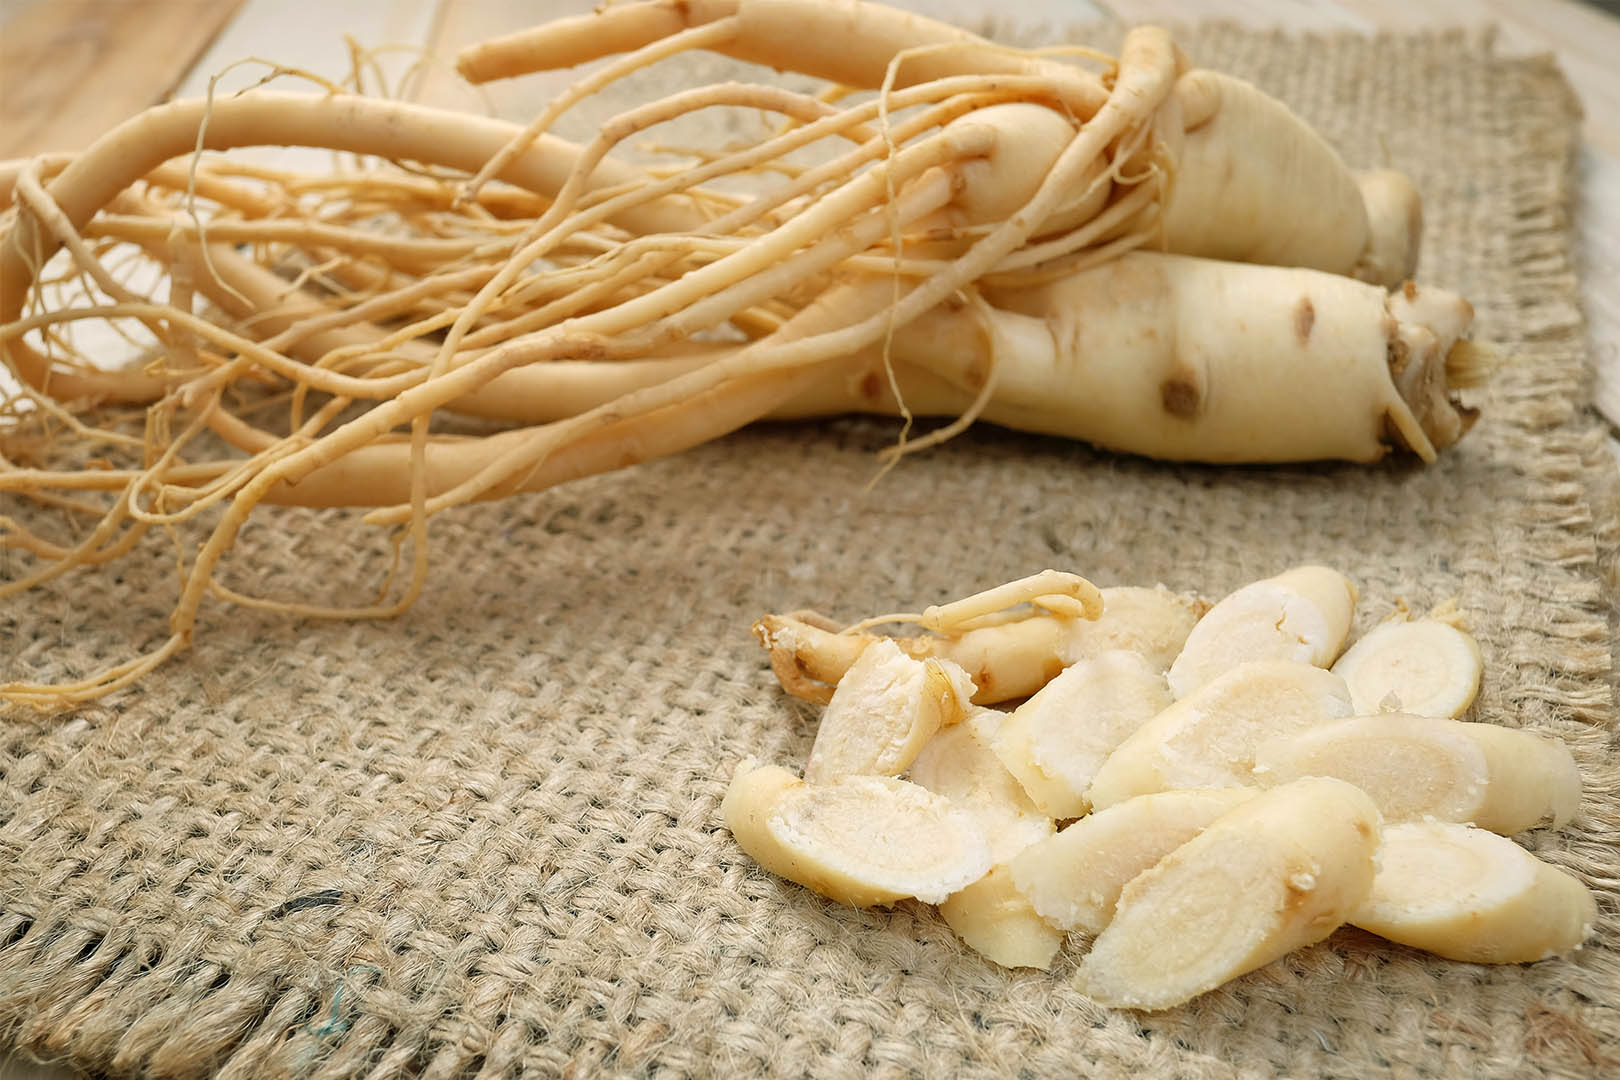 Benefits of Ginseng Herbal Plants